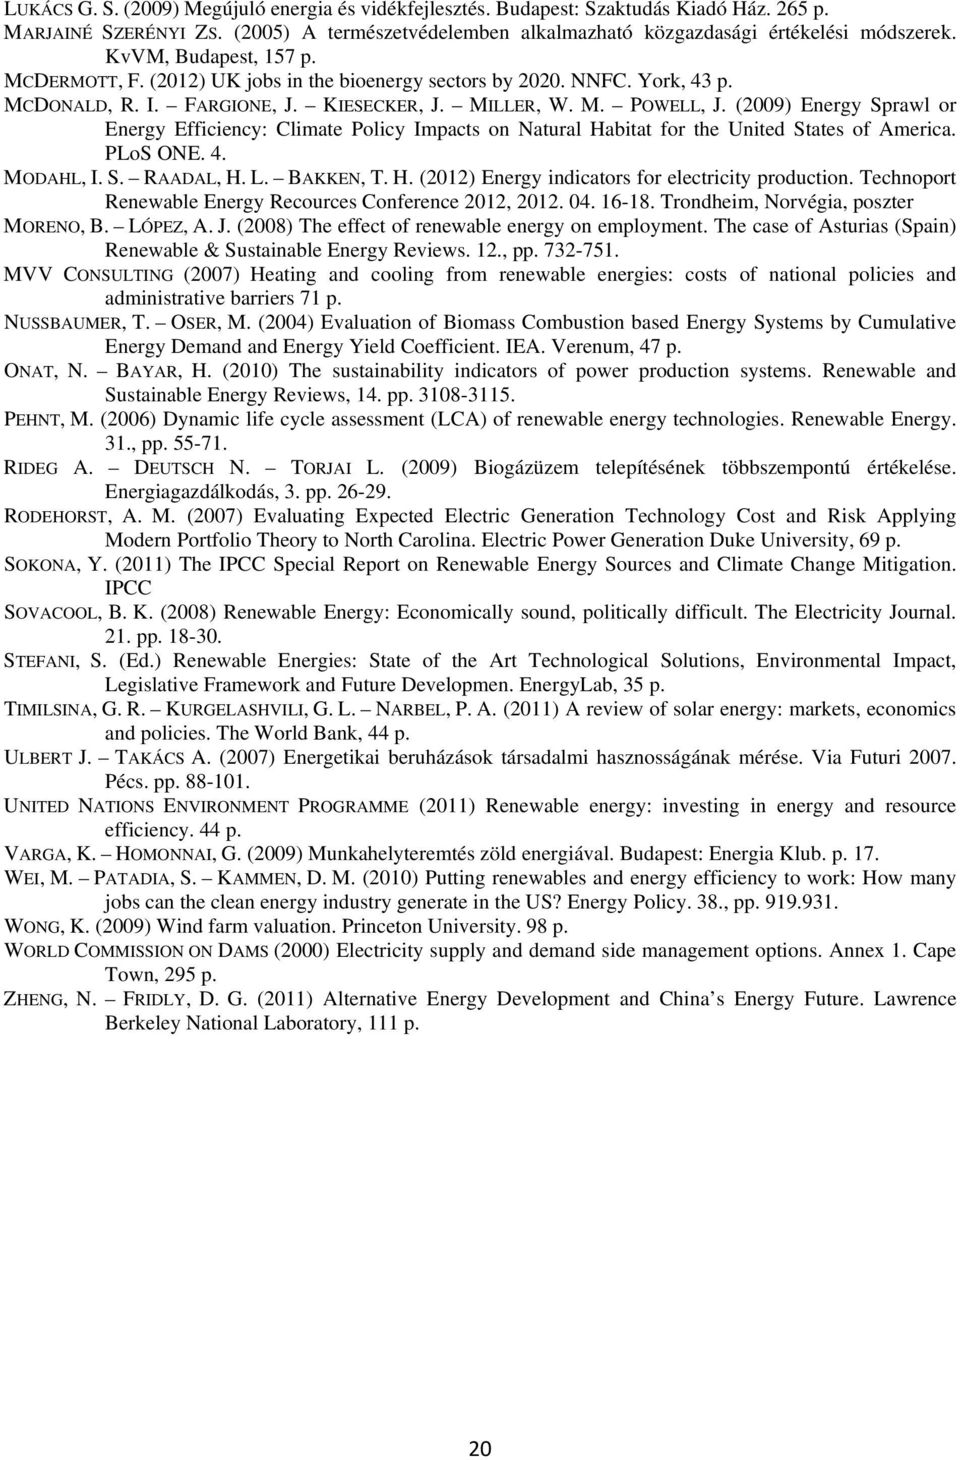 (2009) Energy Sprawl or Energy Efficiency: Climate Policy Impacts on Natural Habitat for the United States of America. PLoS ONE. 4. MODAHL, I. S. RAADAL, H. L. BAKKEN, T. H. (2012) Energy indicators for electricity production.